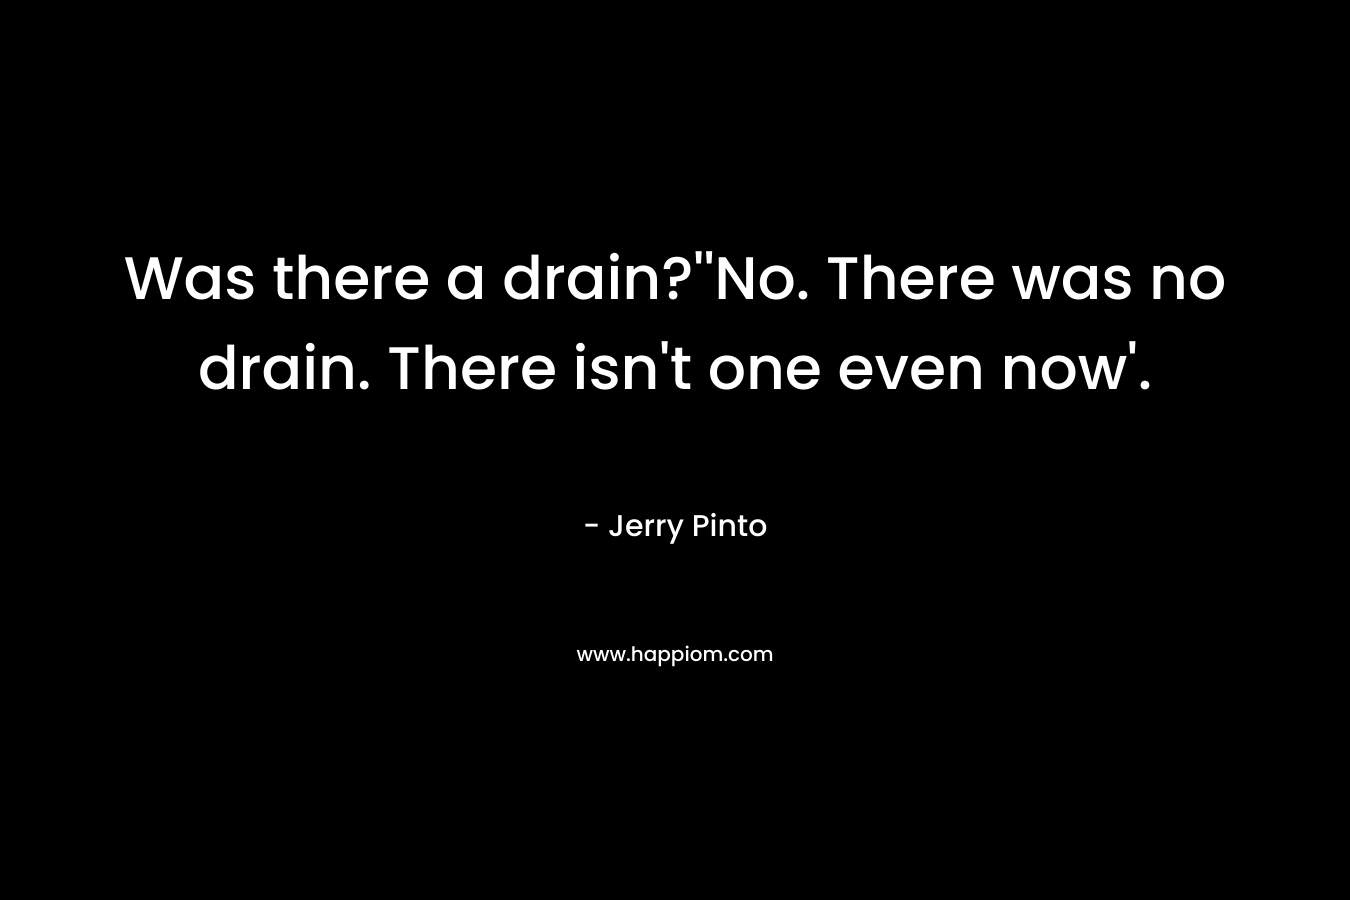 Was there a drain?”No. There was no drain. There isn’t one even now’. – Jerry Pinto